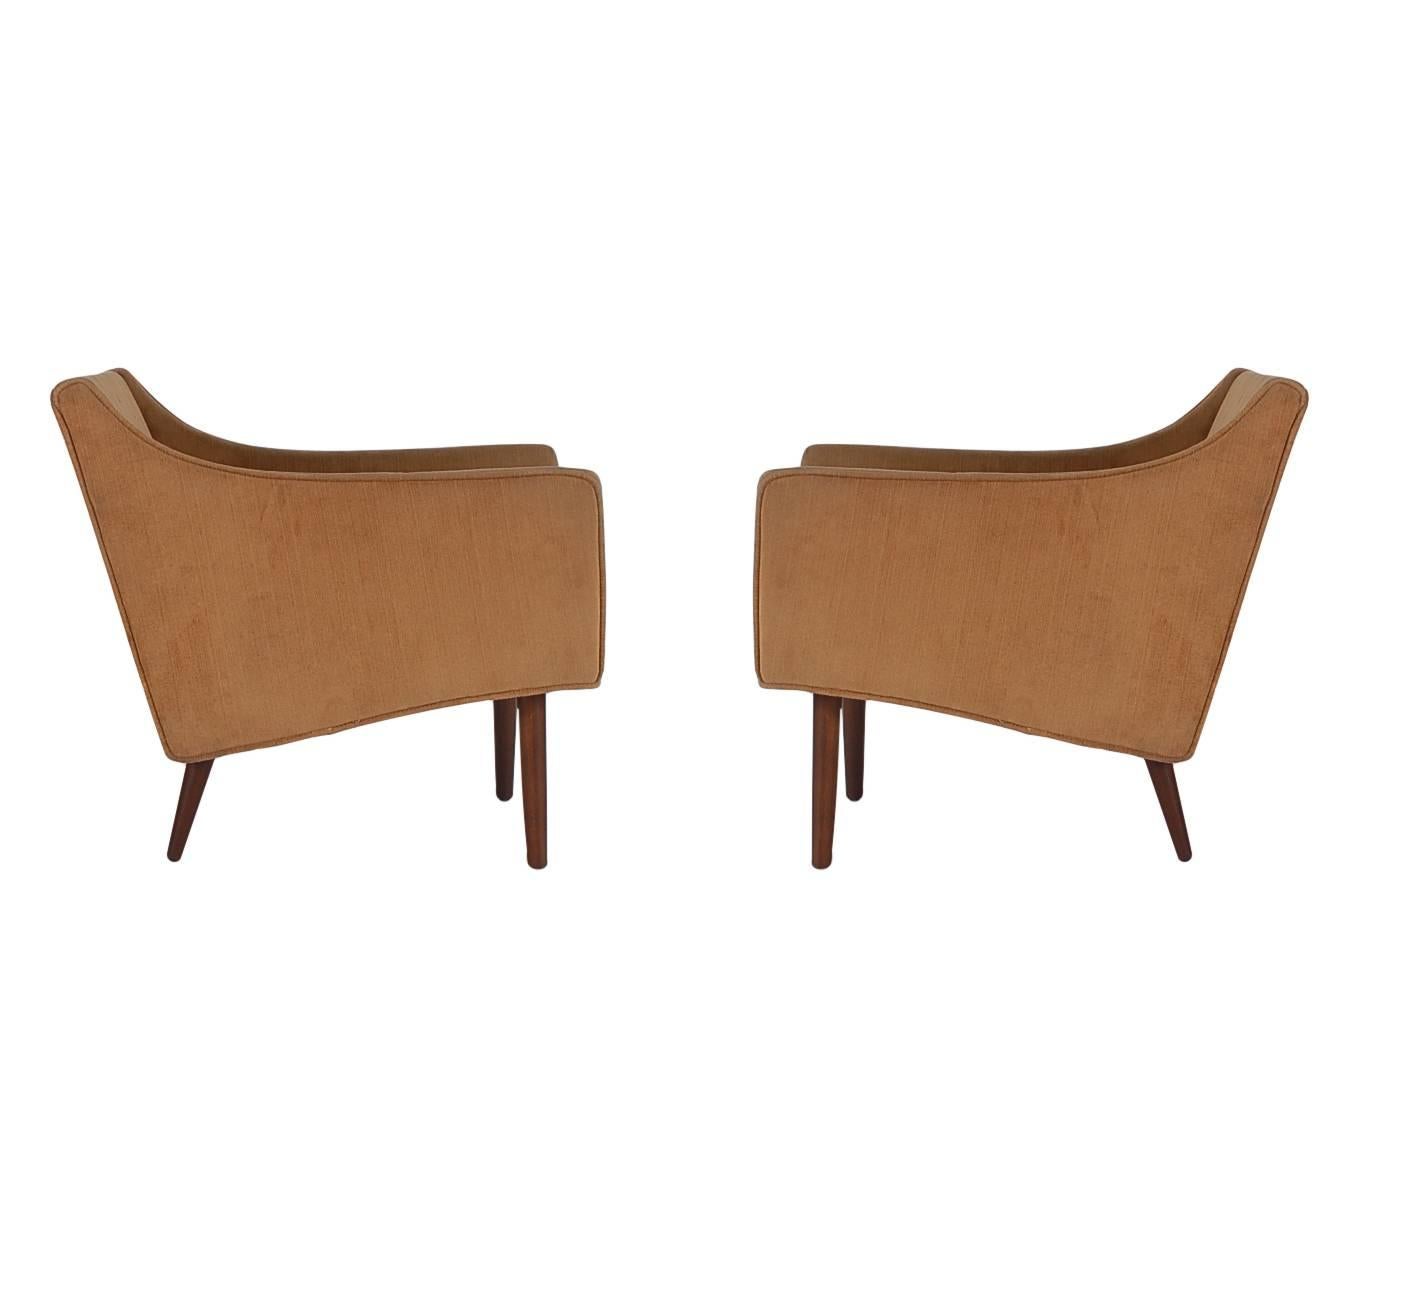 American Mid-Century Modern Lounge Club Chairs after Paul McCobb or Edward Wormley